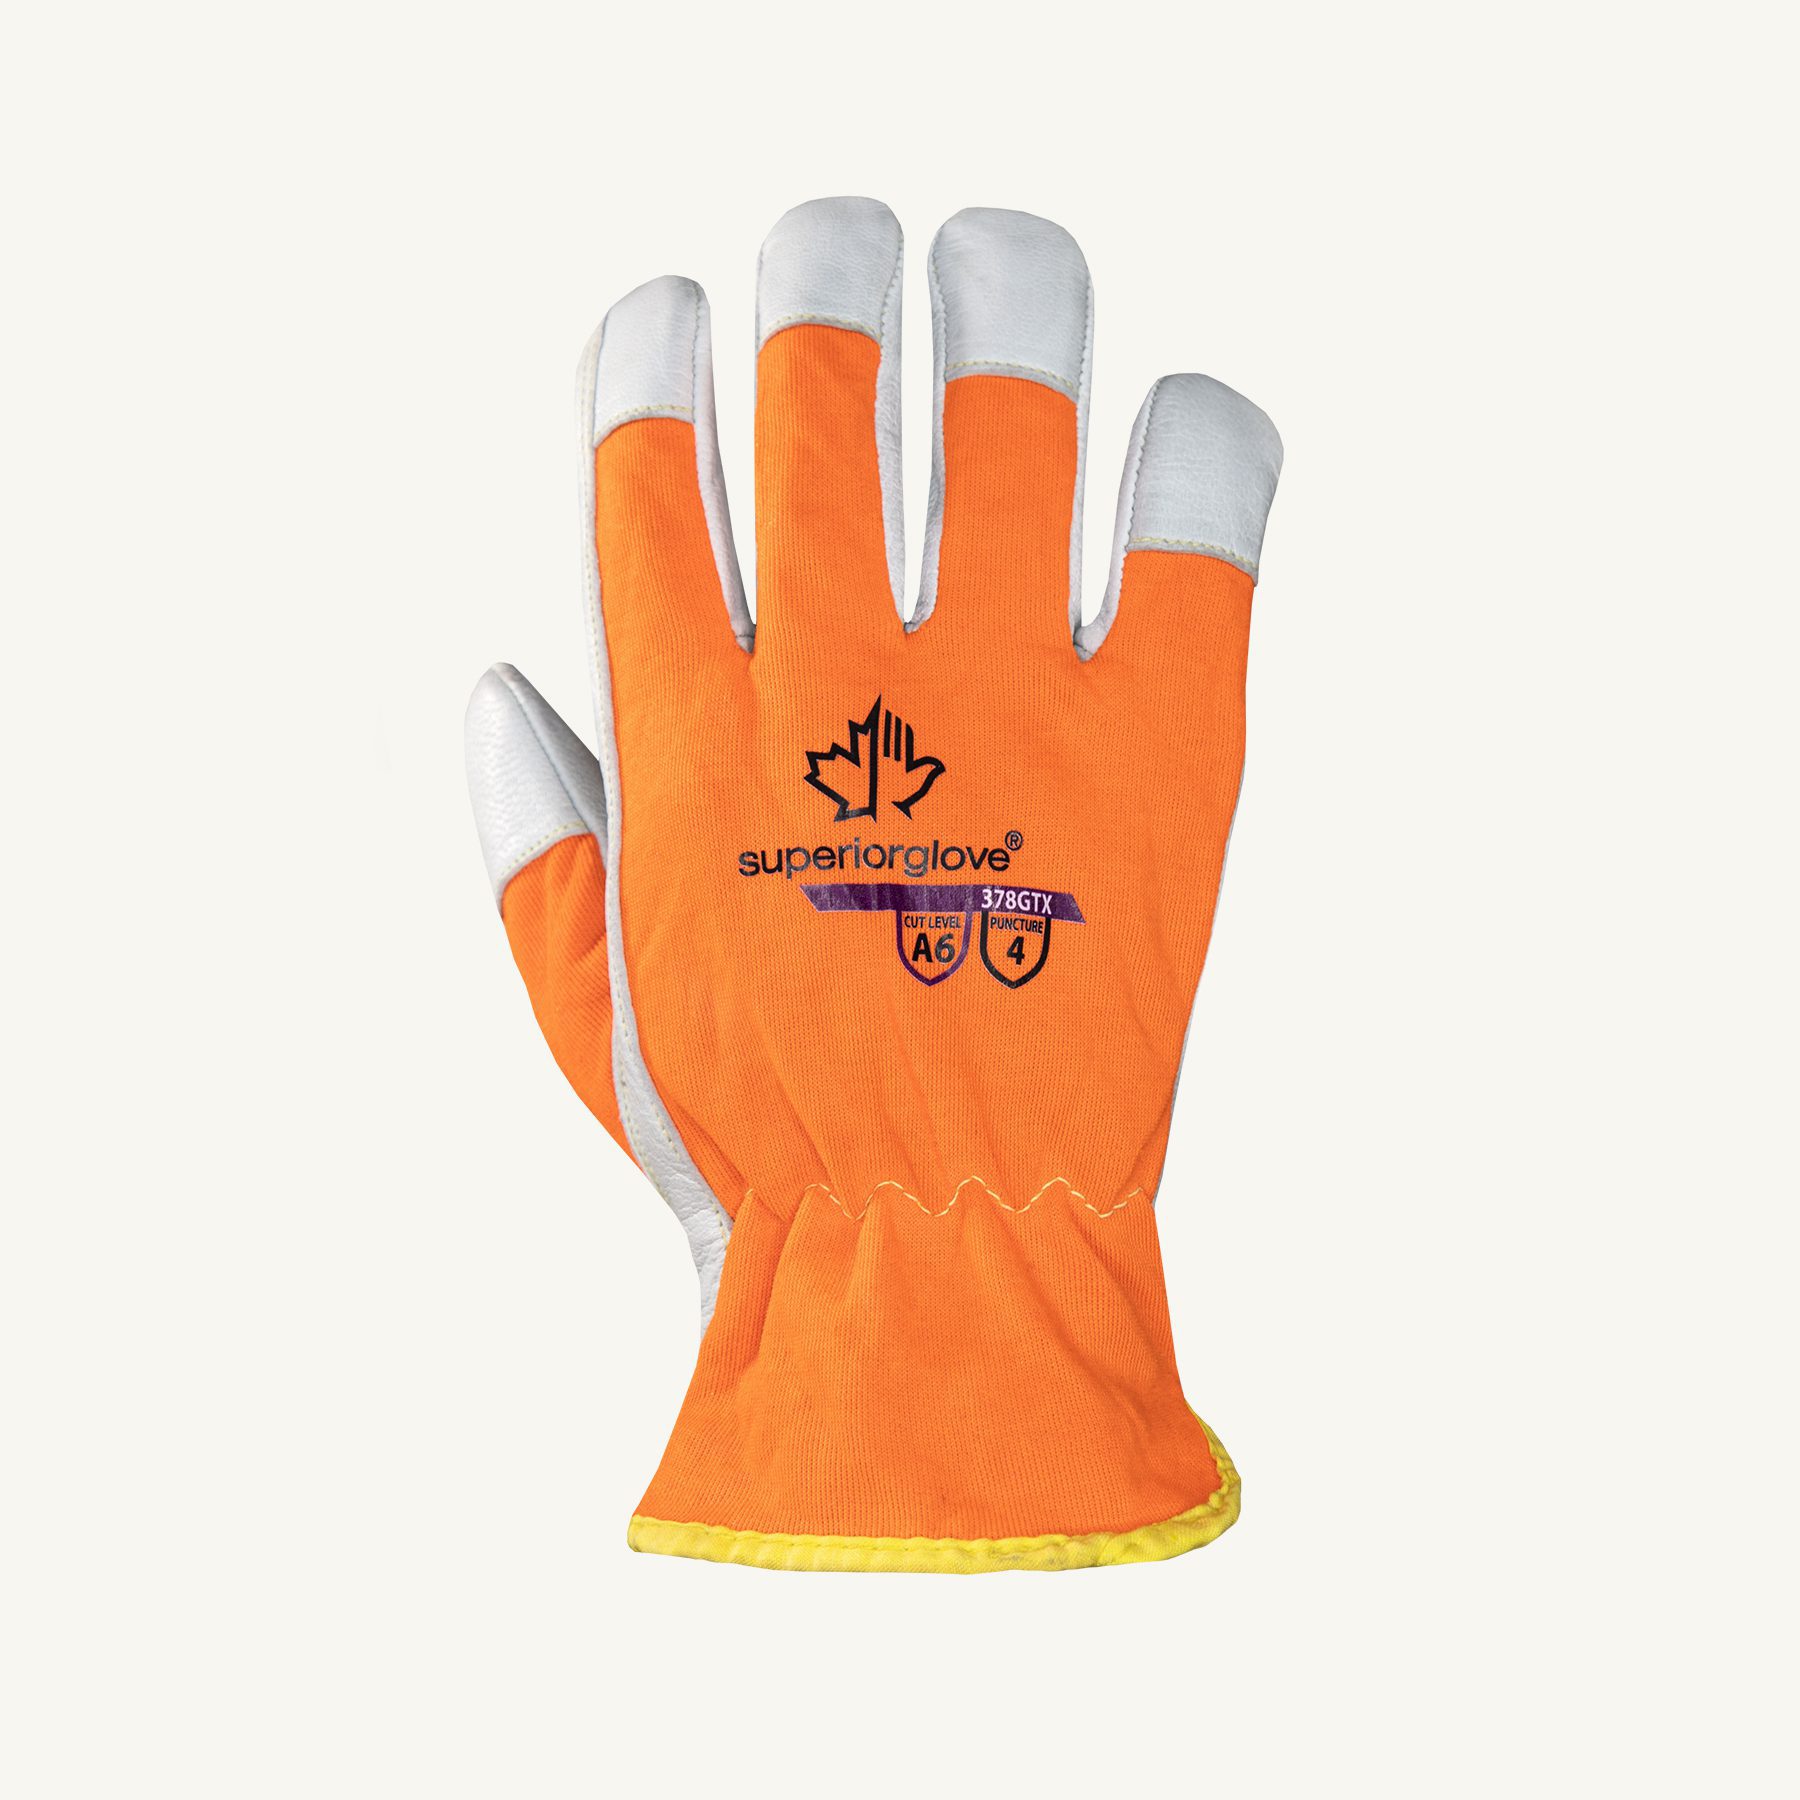 Cut-Resistant Gloves, Spectra-Guard 10G, AS ONE